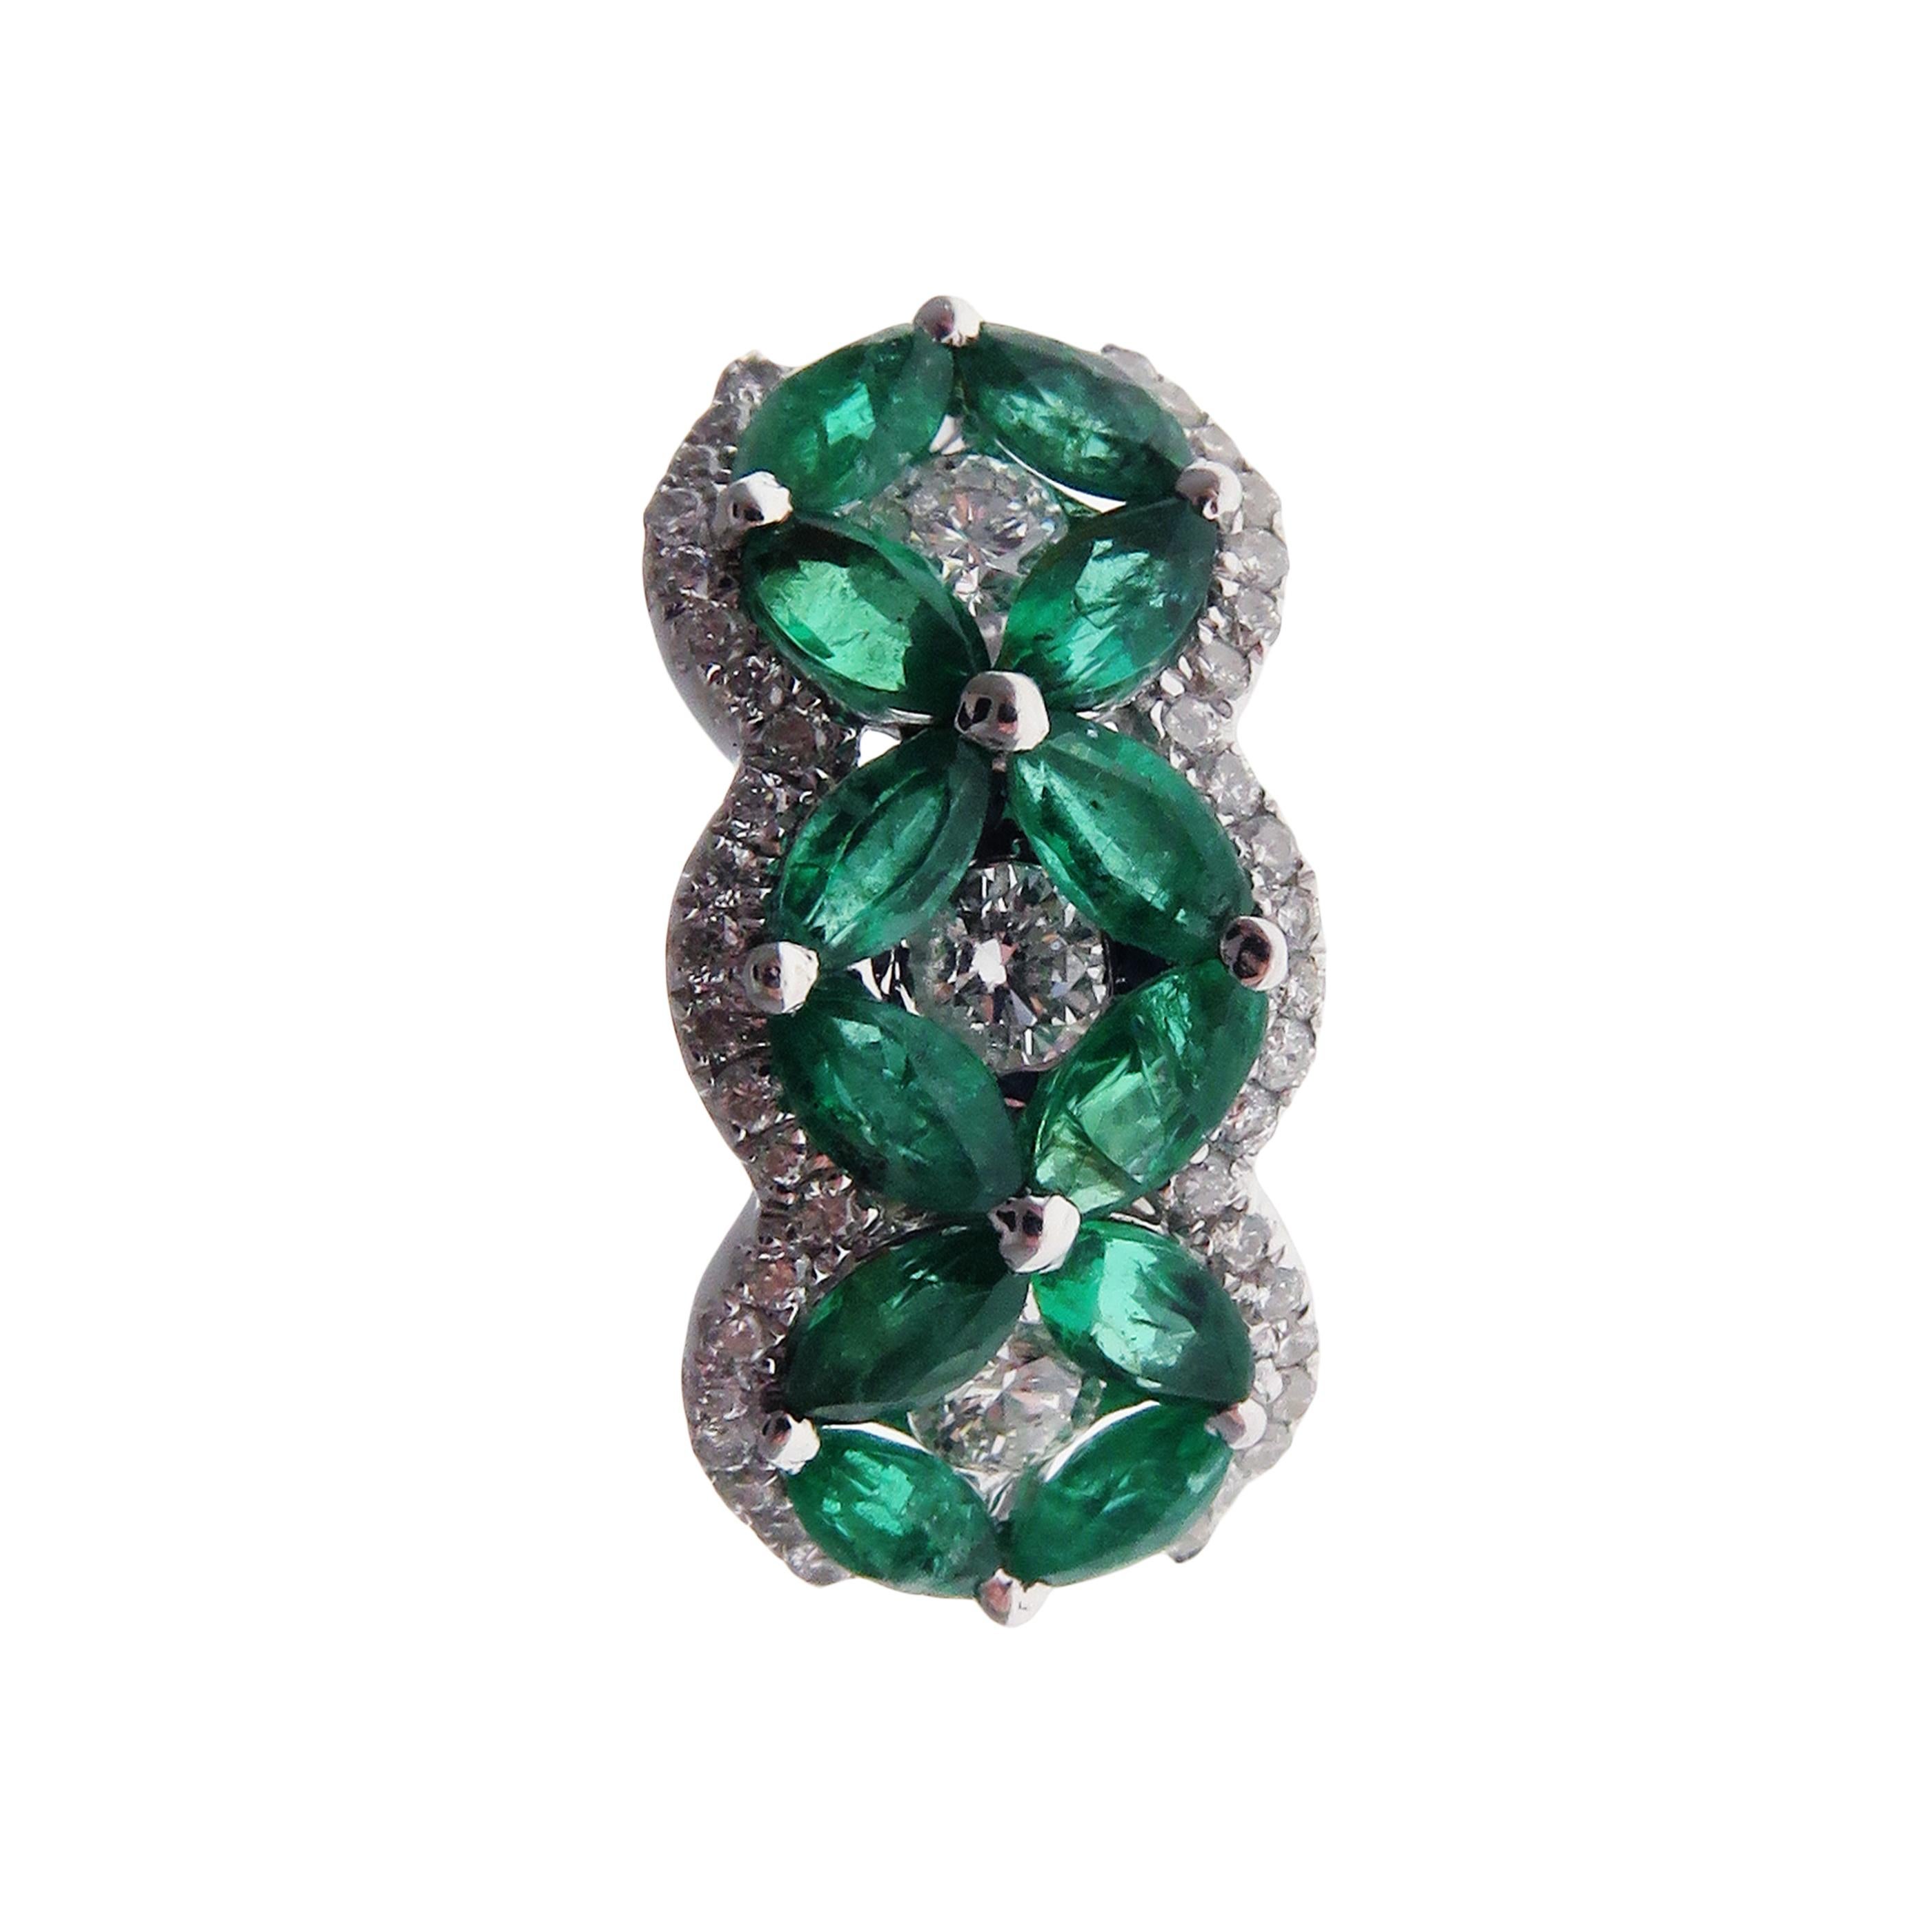 These small sized emerald huggy studs are crafted in 18-karat white gold, weighing approximately 0.70 total carats of SI-H Quality white diamond and 1.90 total carats of emerald stones. Post-style backing. 

Our Color Stone Collection features a